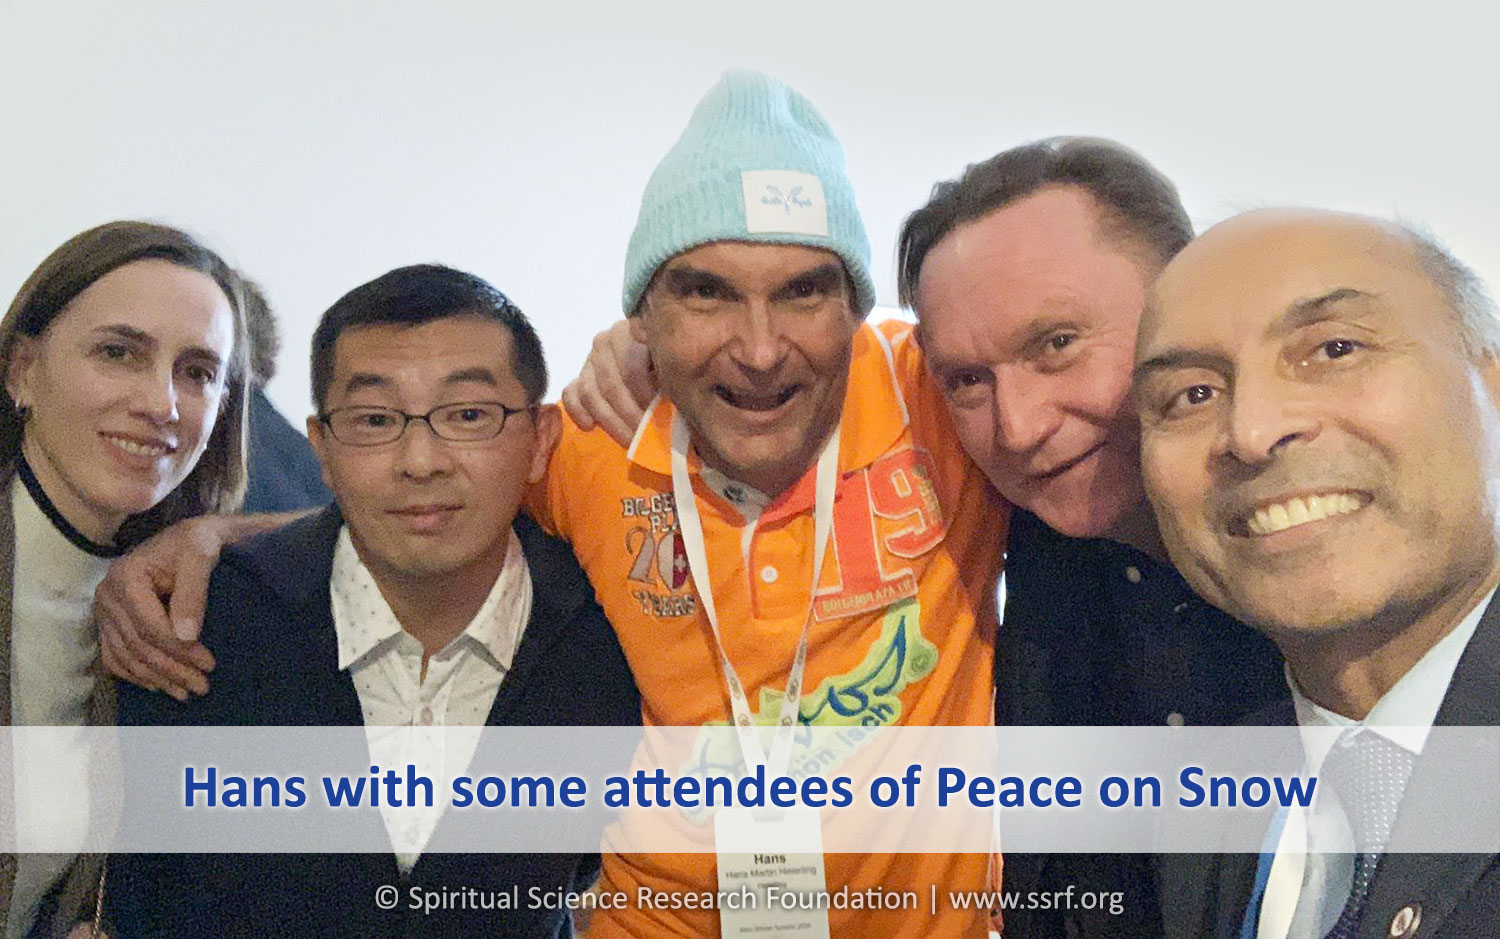 Hans with some attendees of Peace on Snow